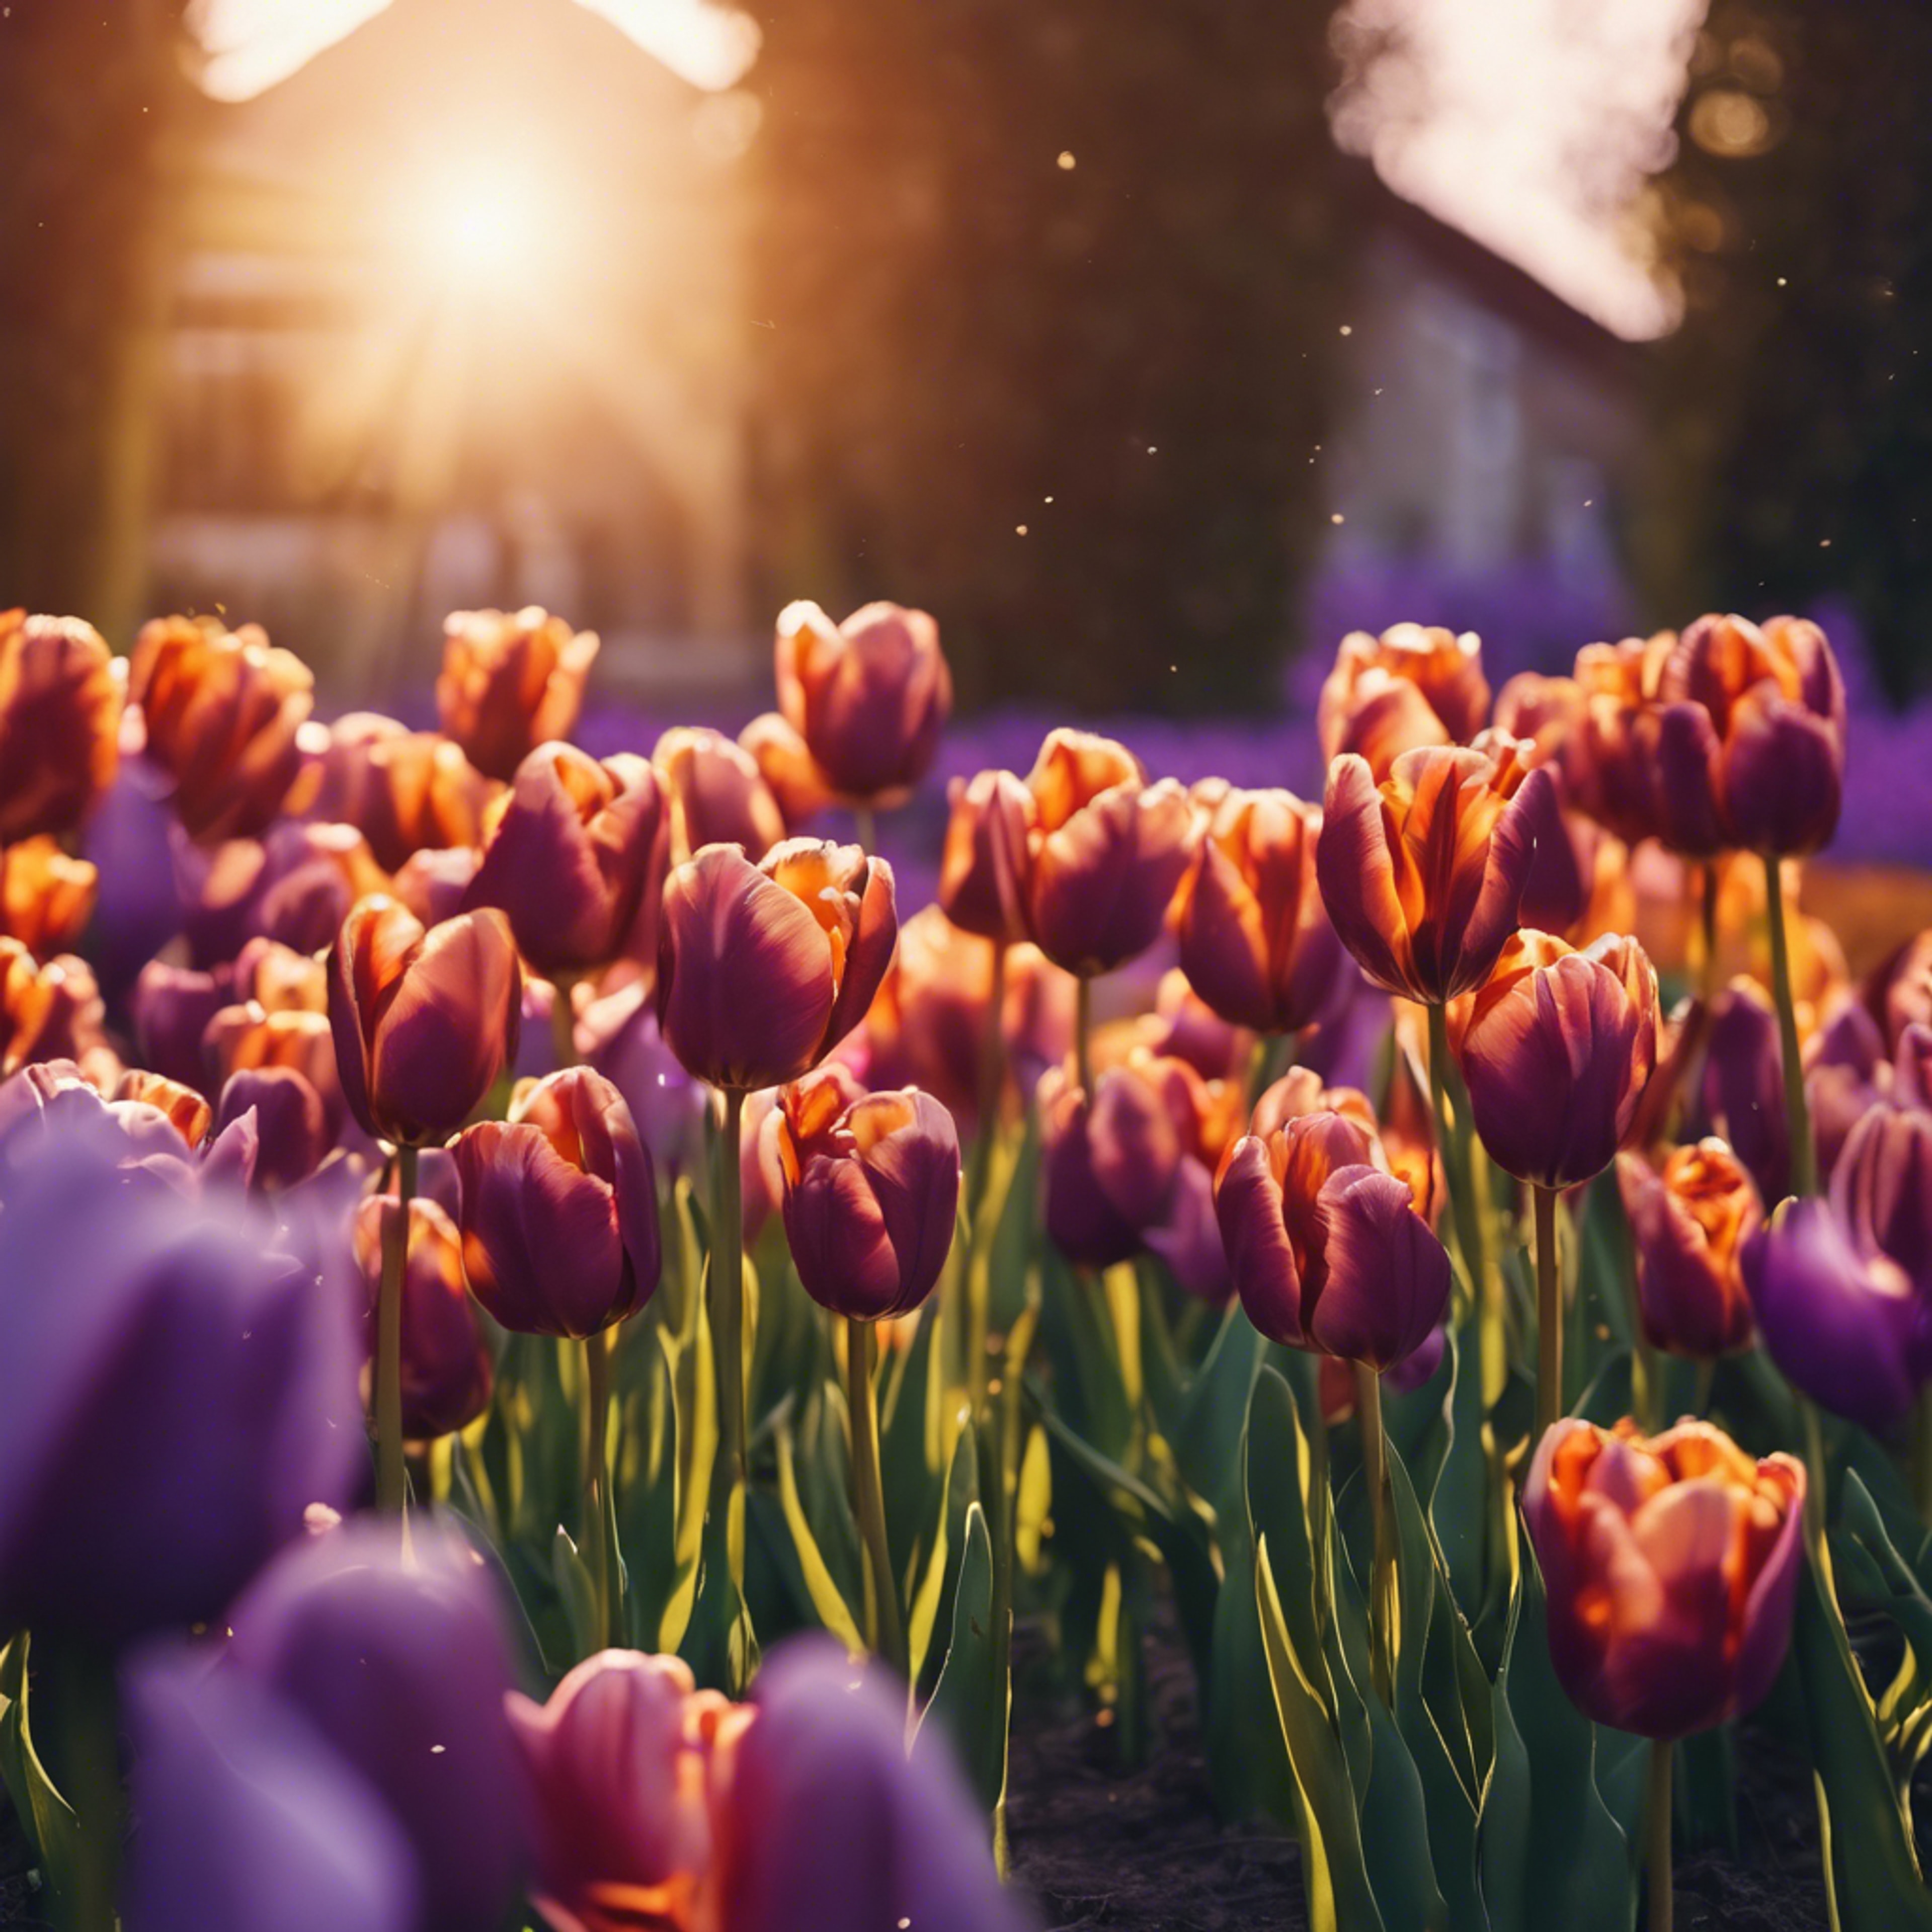 Tulips in a garden, bathed in the purple and orange rays of the setting sun. Tapetai[929499f715404d6e96f8]